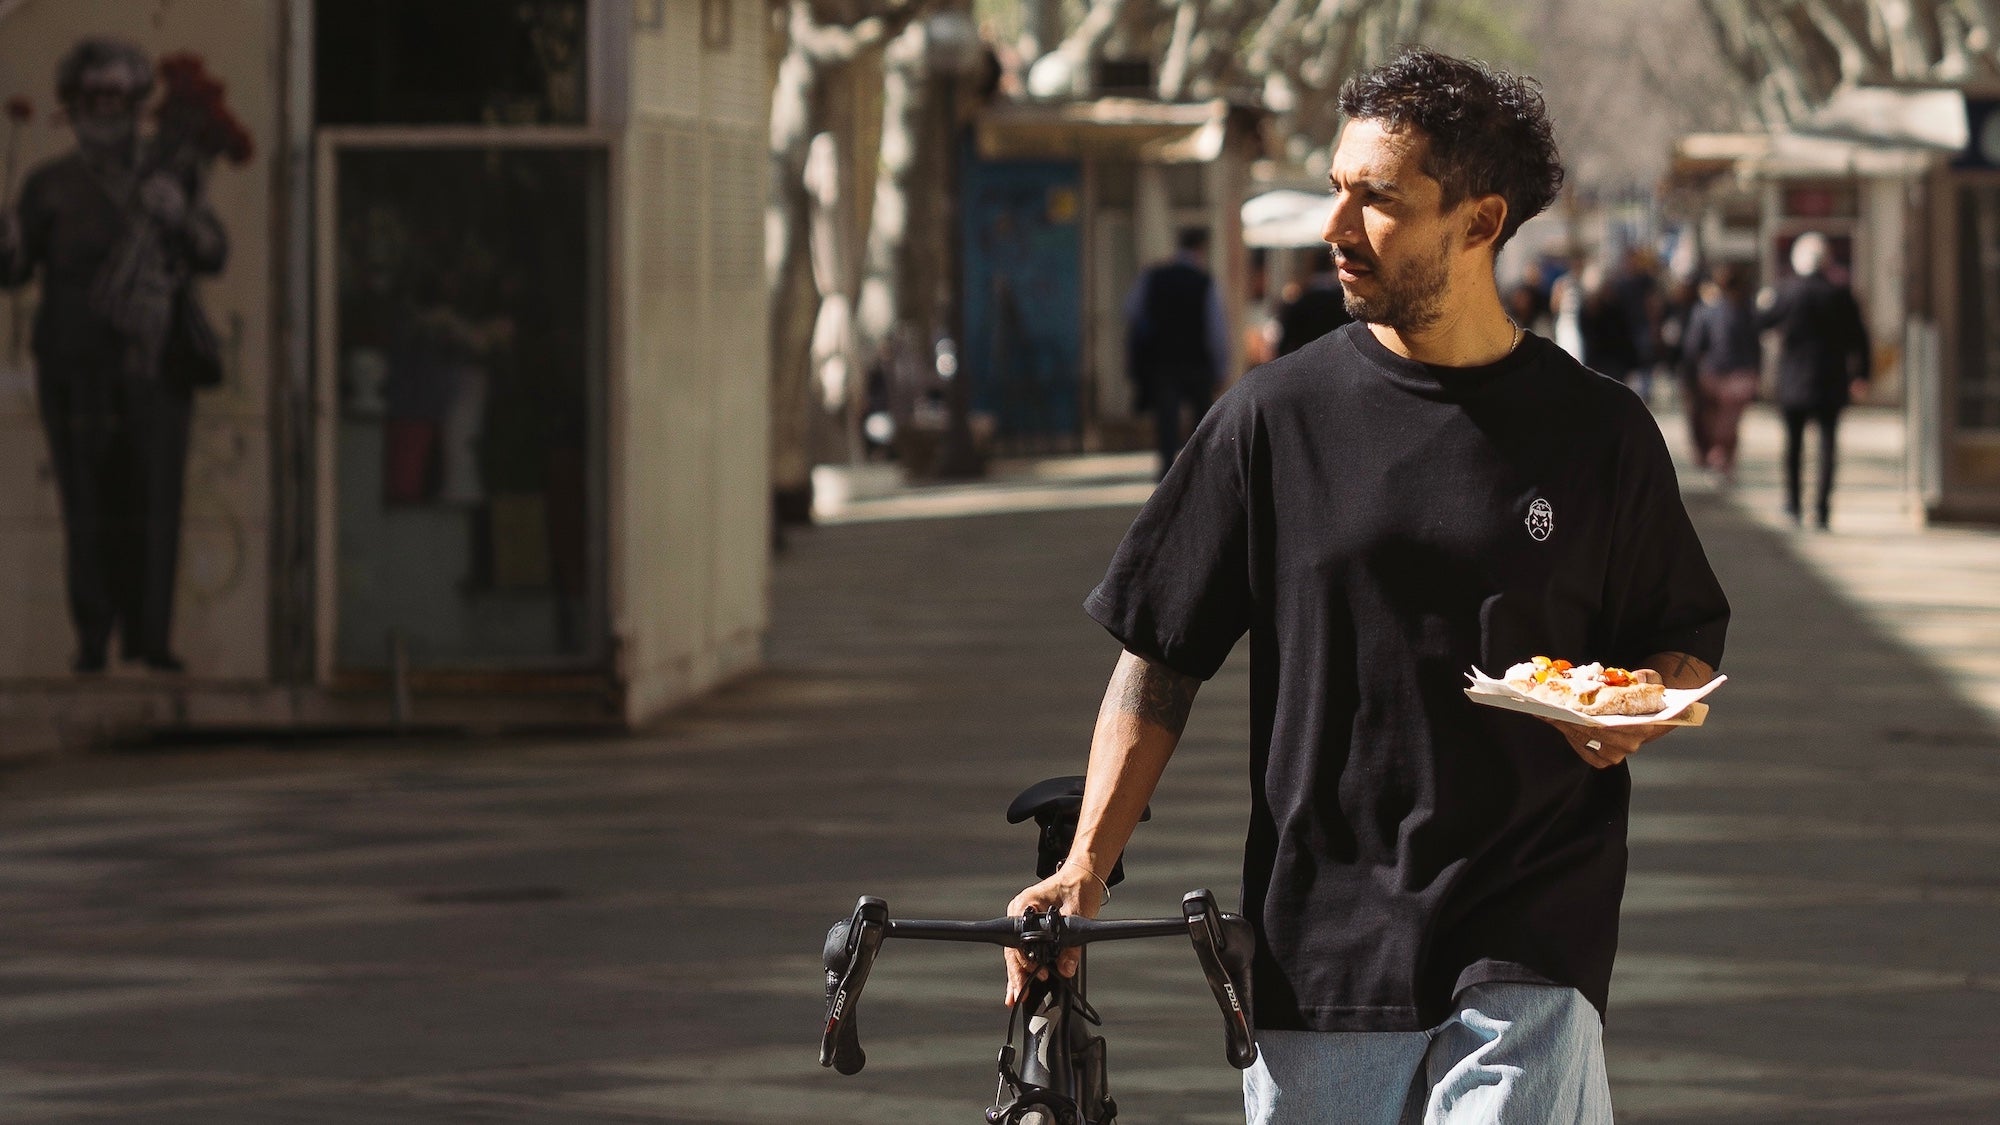 A cyclist walking down the street in an Angry Pablo t-shirt